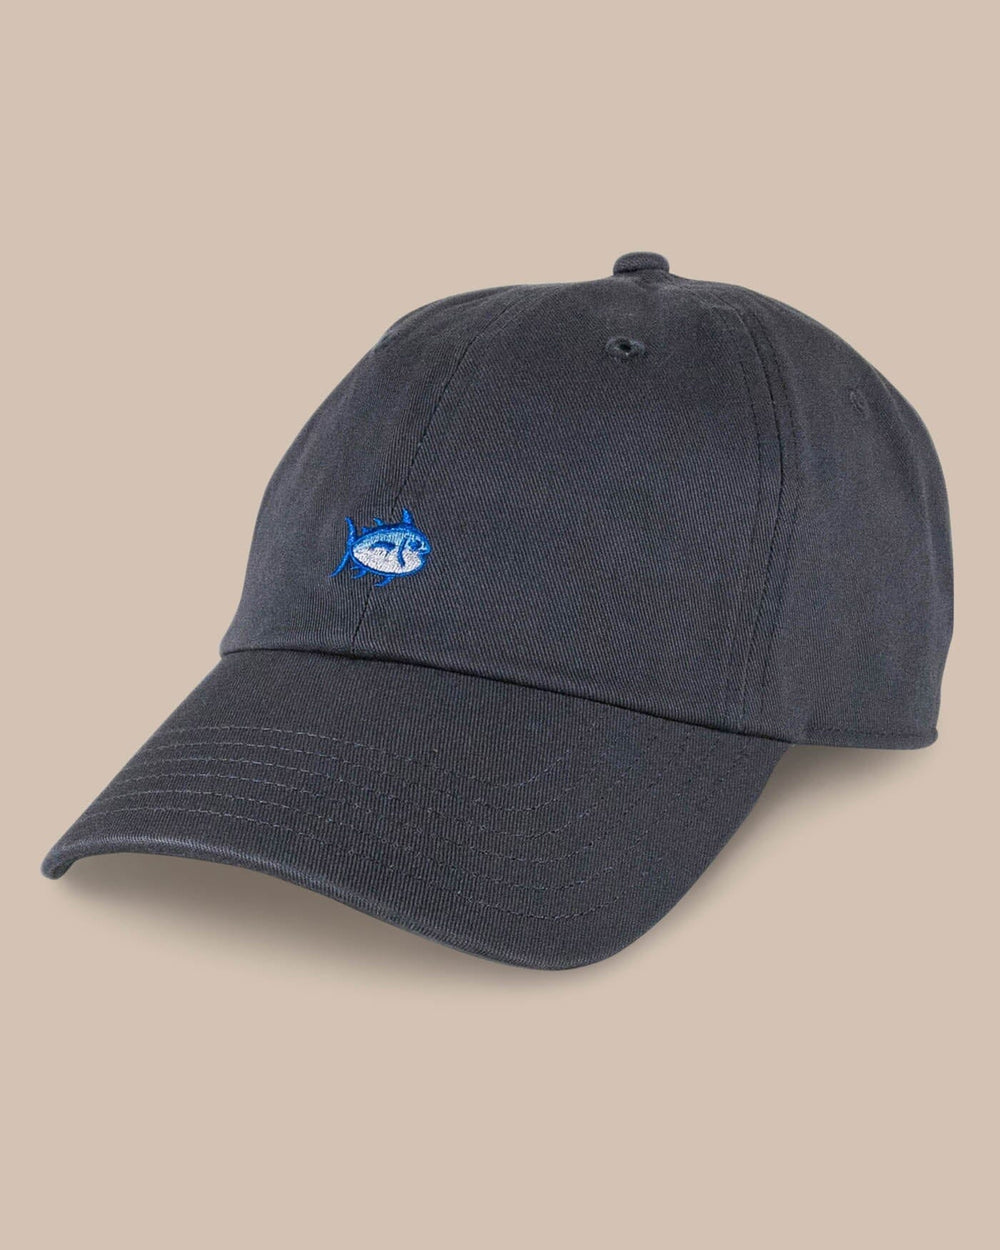 The front view of the Southern Tide Mini Skipjack Leather Strap Hat by Southern Tide - Charcoal